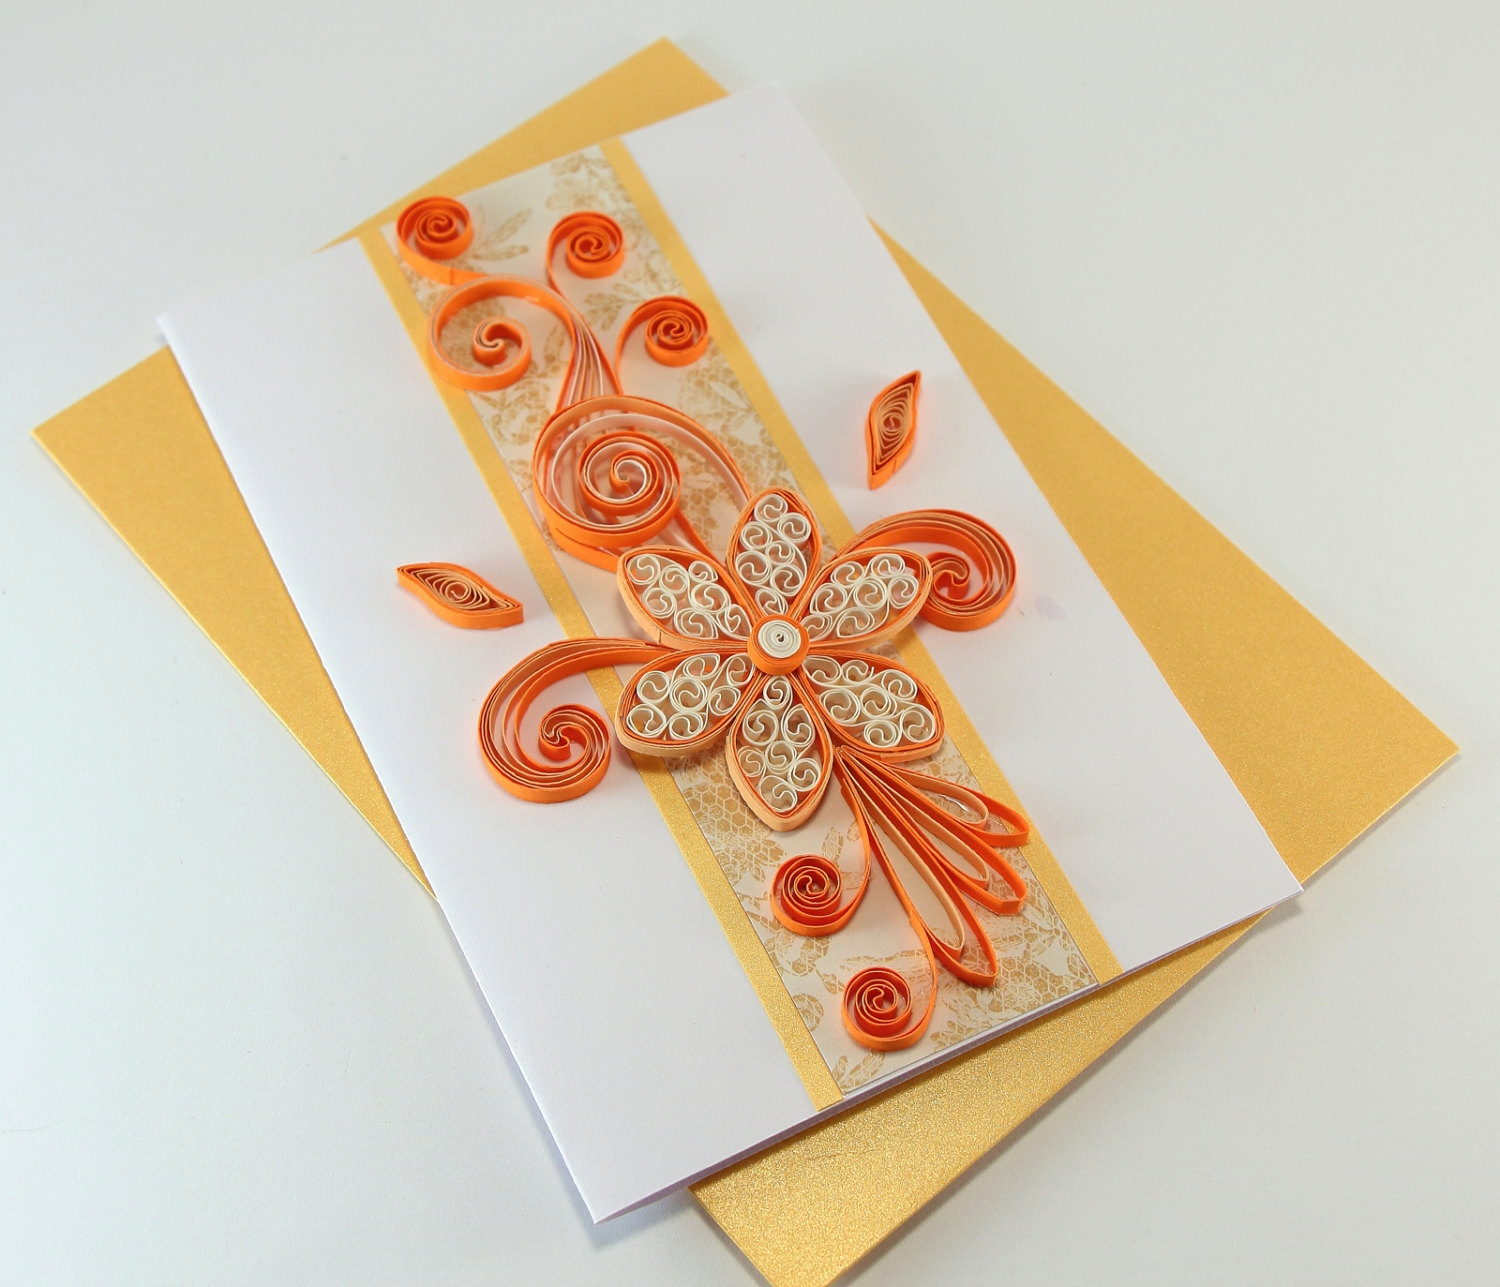 Quilling Birthday Cards Ideas Paper Quilling Birthday Cards Designs Awesome Quilling Greeting